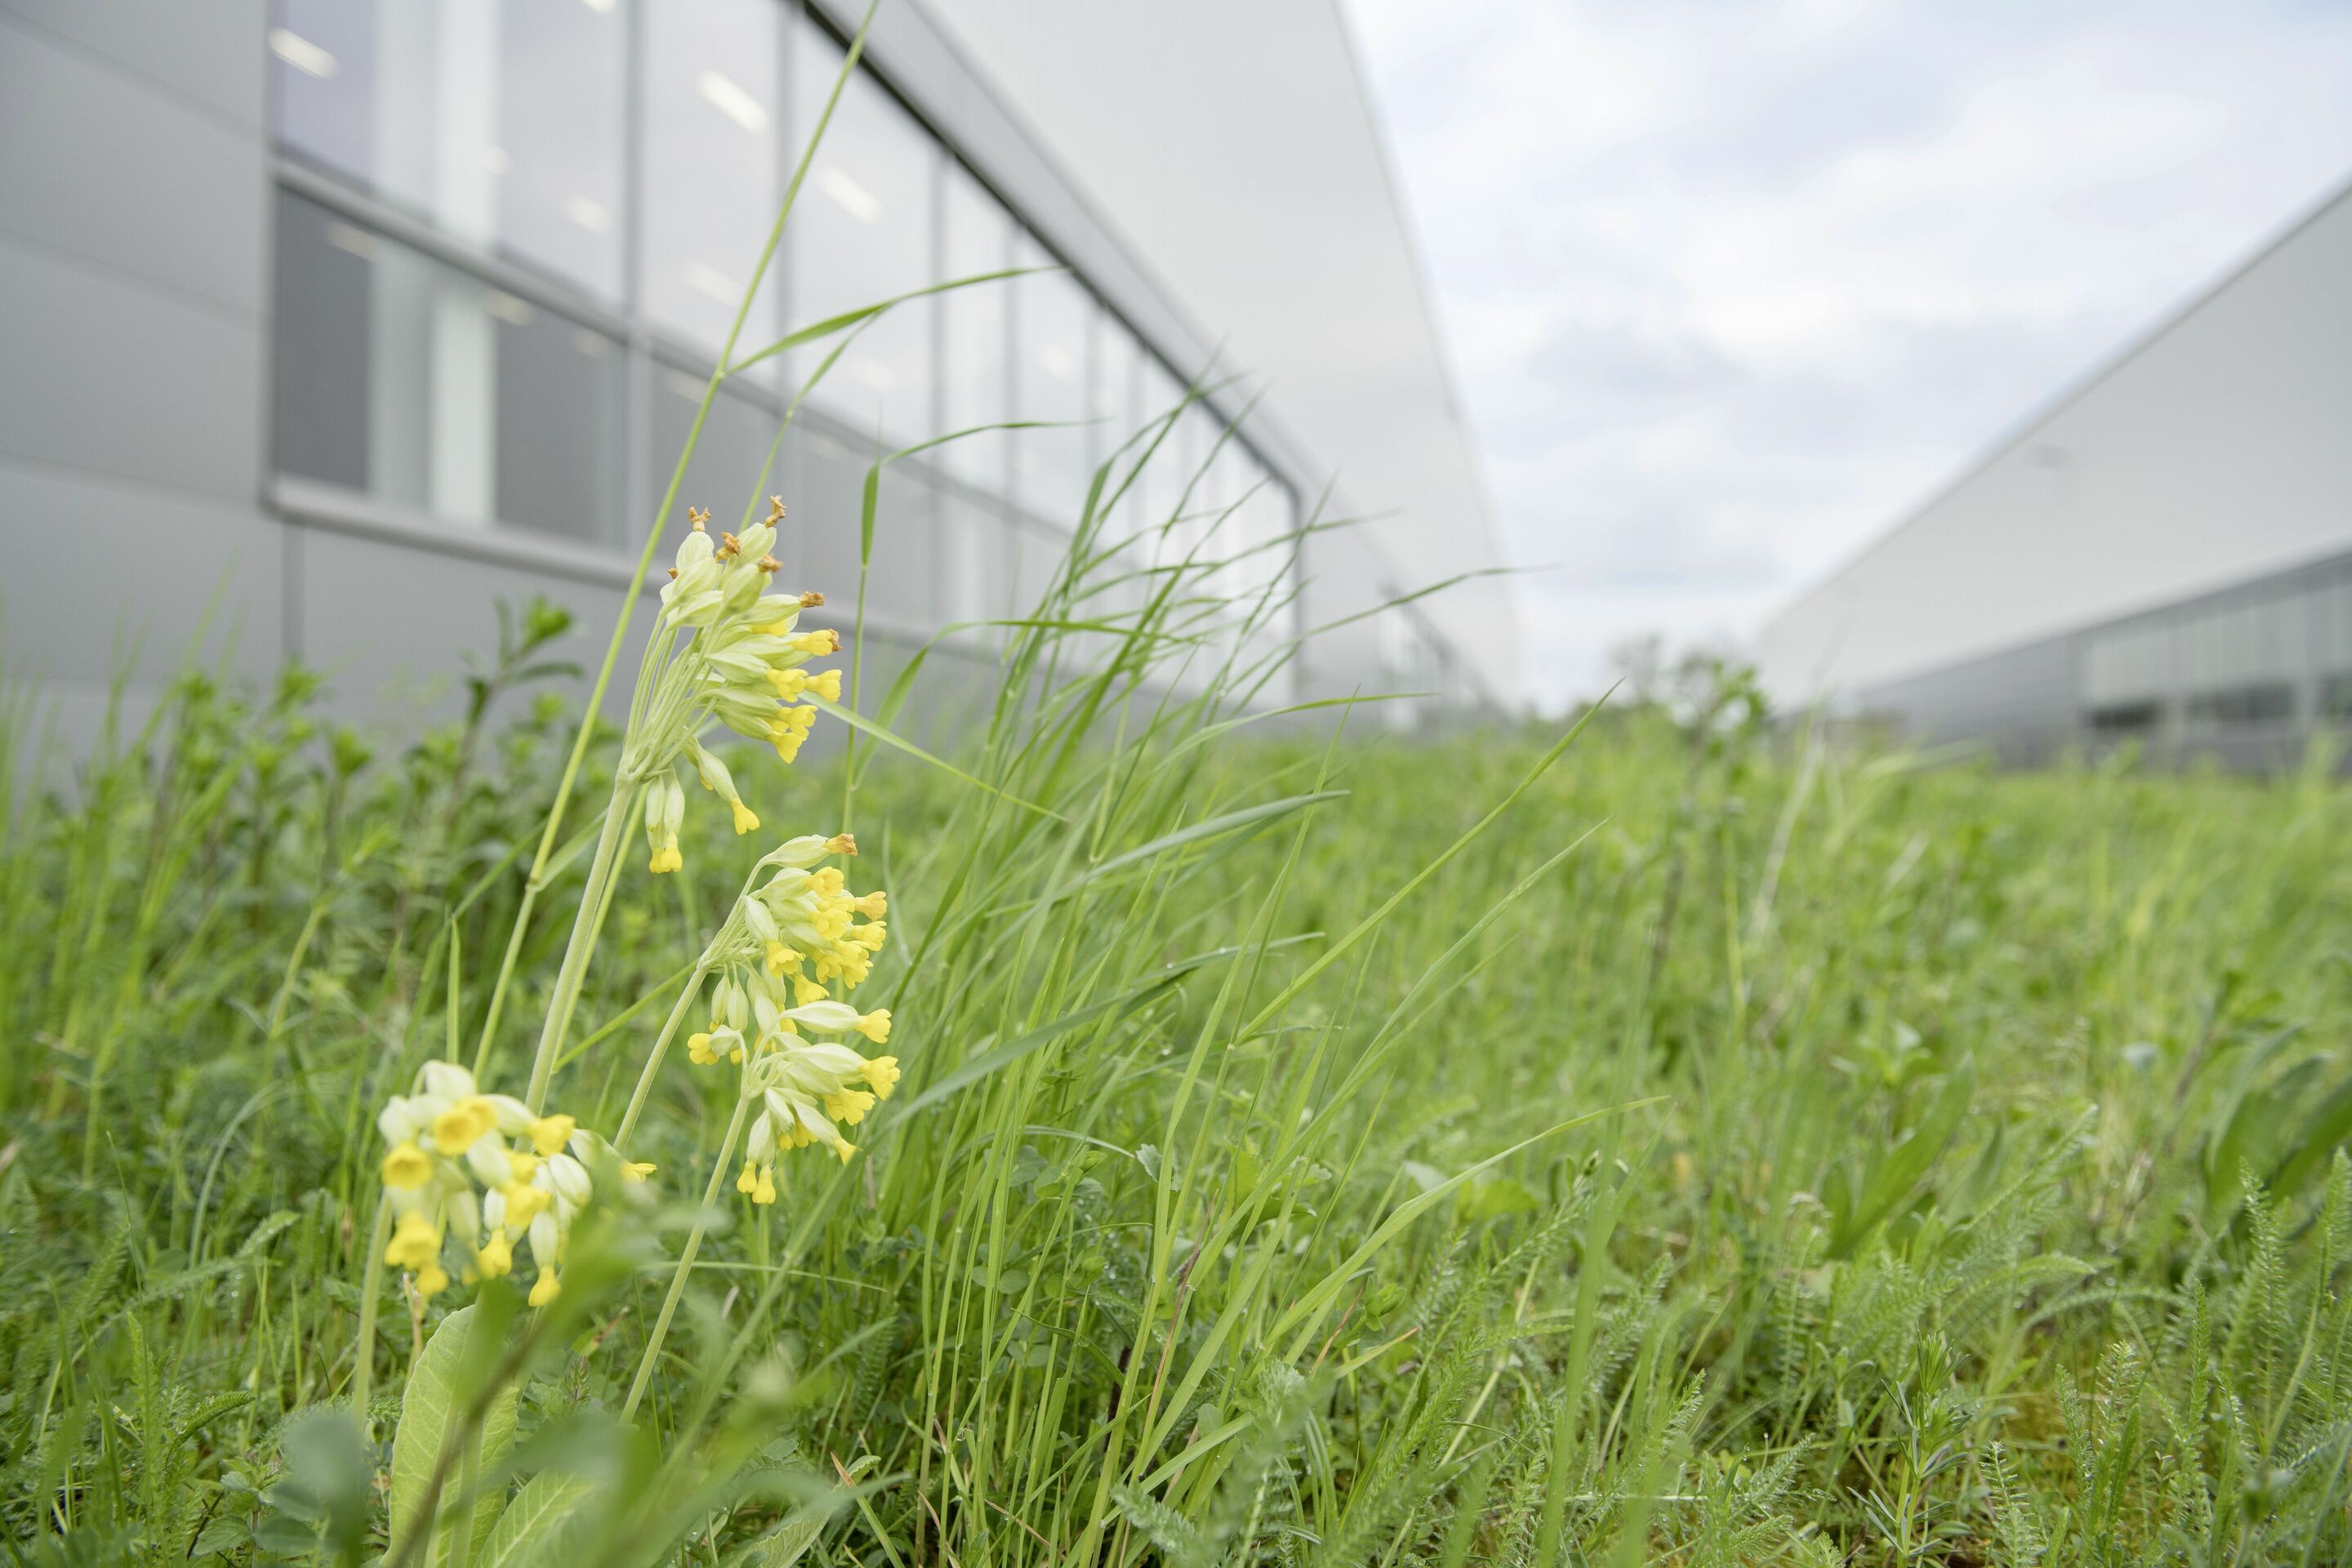 Audi creates near-natural habitat for animals and plants on 17 hectares of the plant site